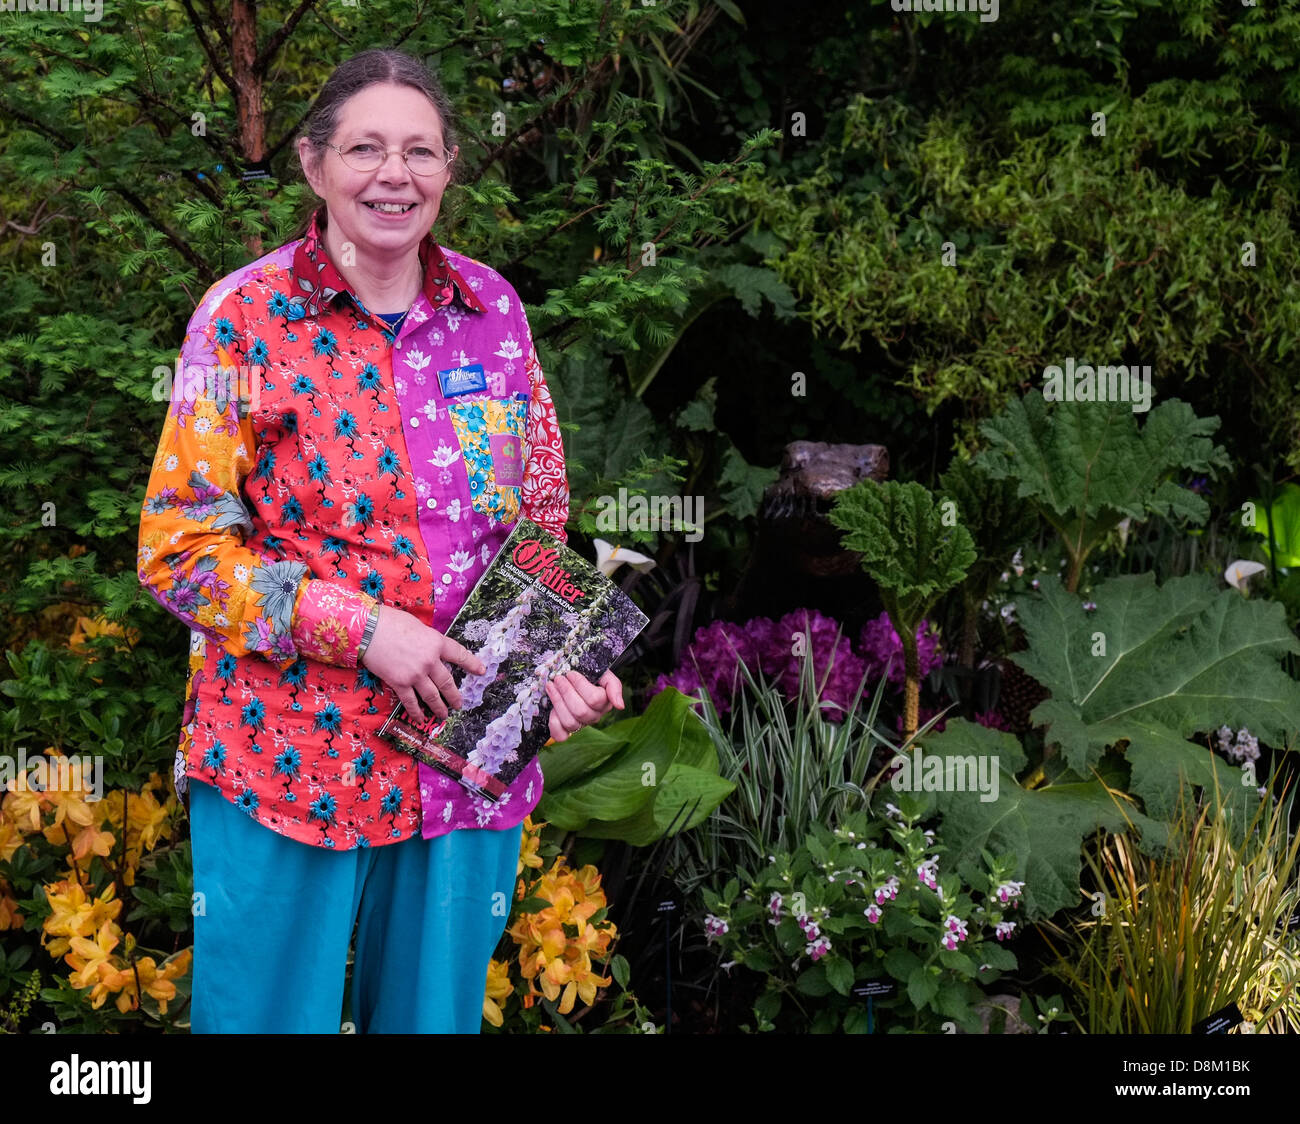 A woman wearing a brightly coloured shirt at the Chelsea Flower Show. Stock Photo